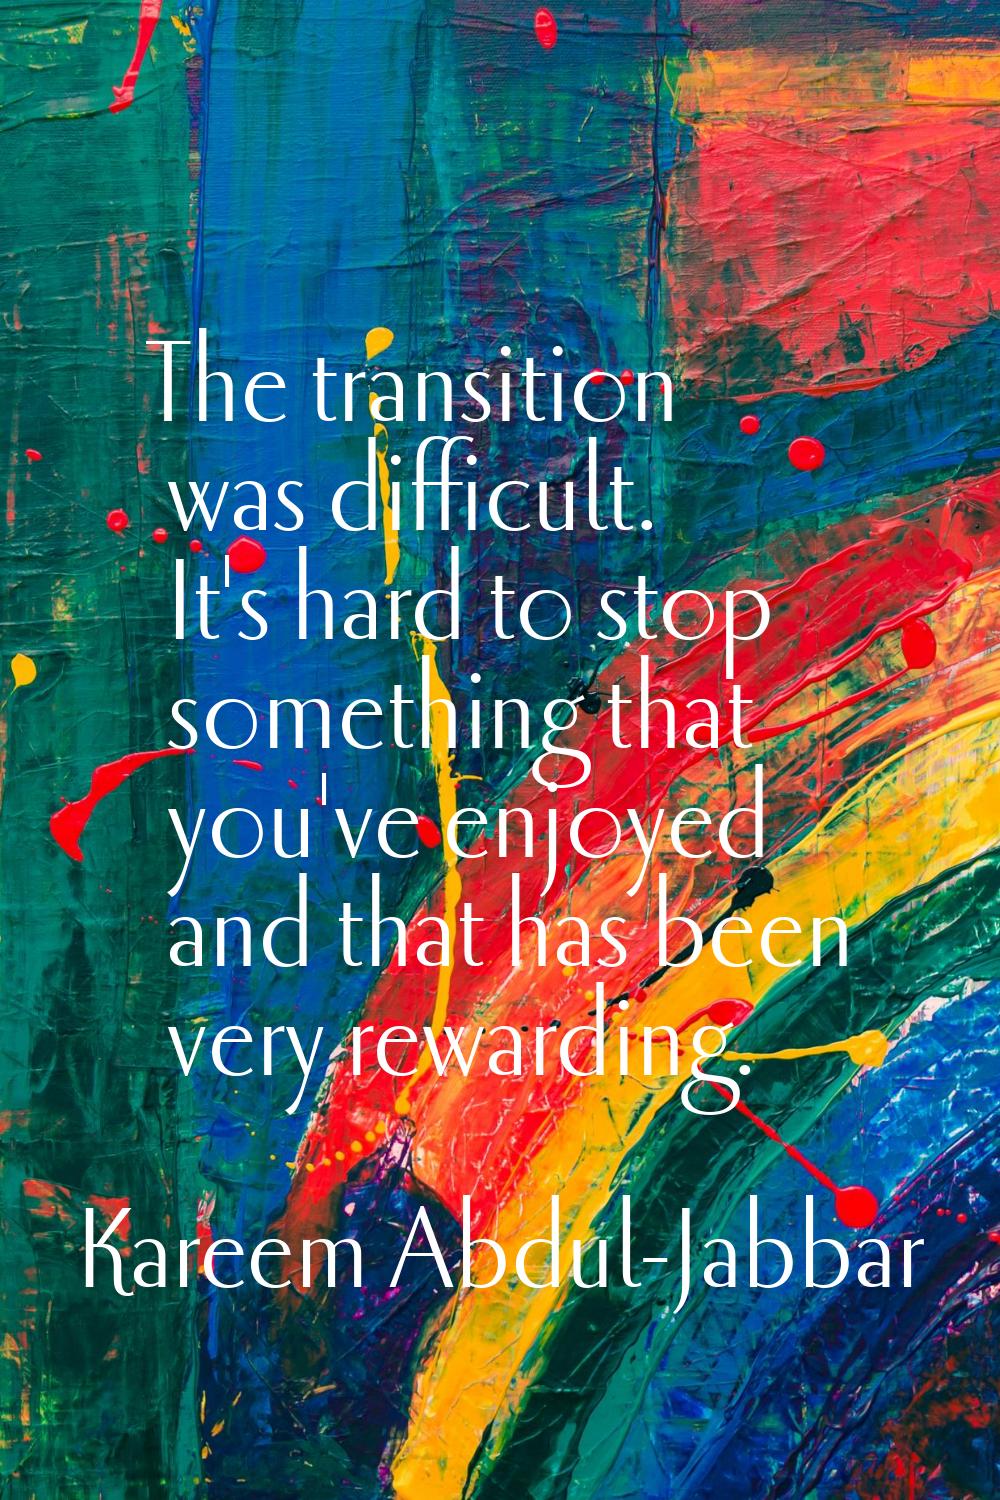 The transition was difficult. It's hard to stop something that you've enjoyed and that has been ver